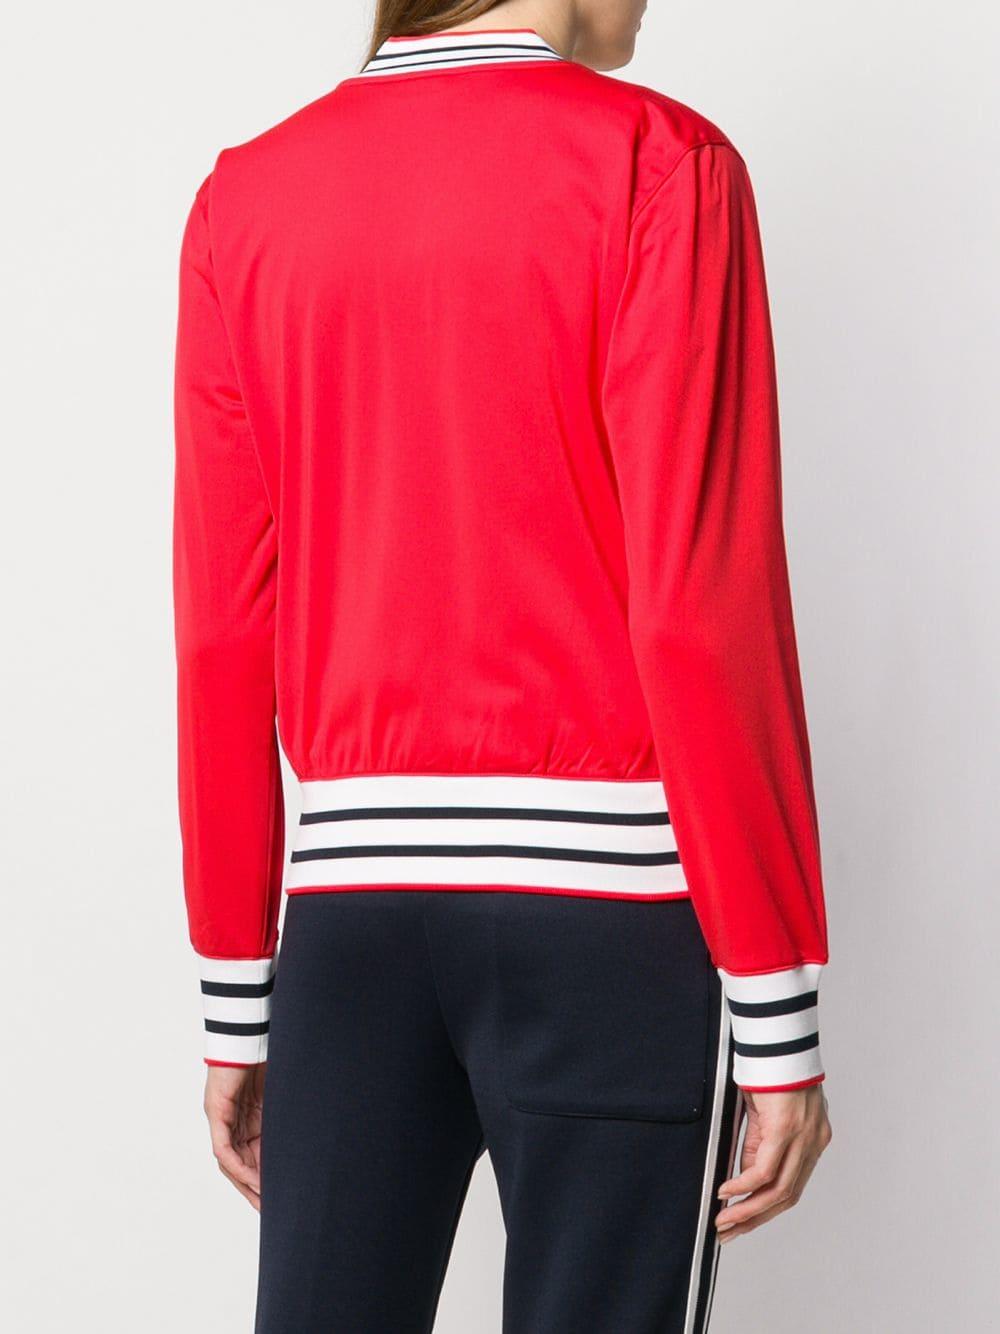 Champion Logo Bomber Jacket in Red - Lyst